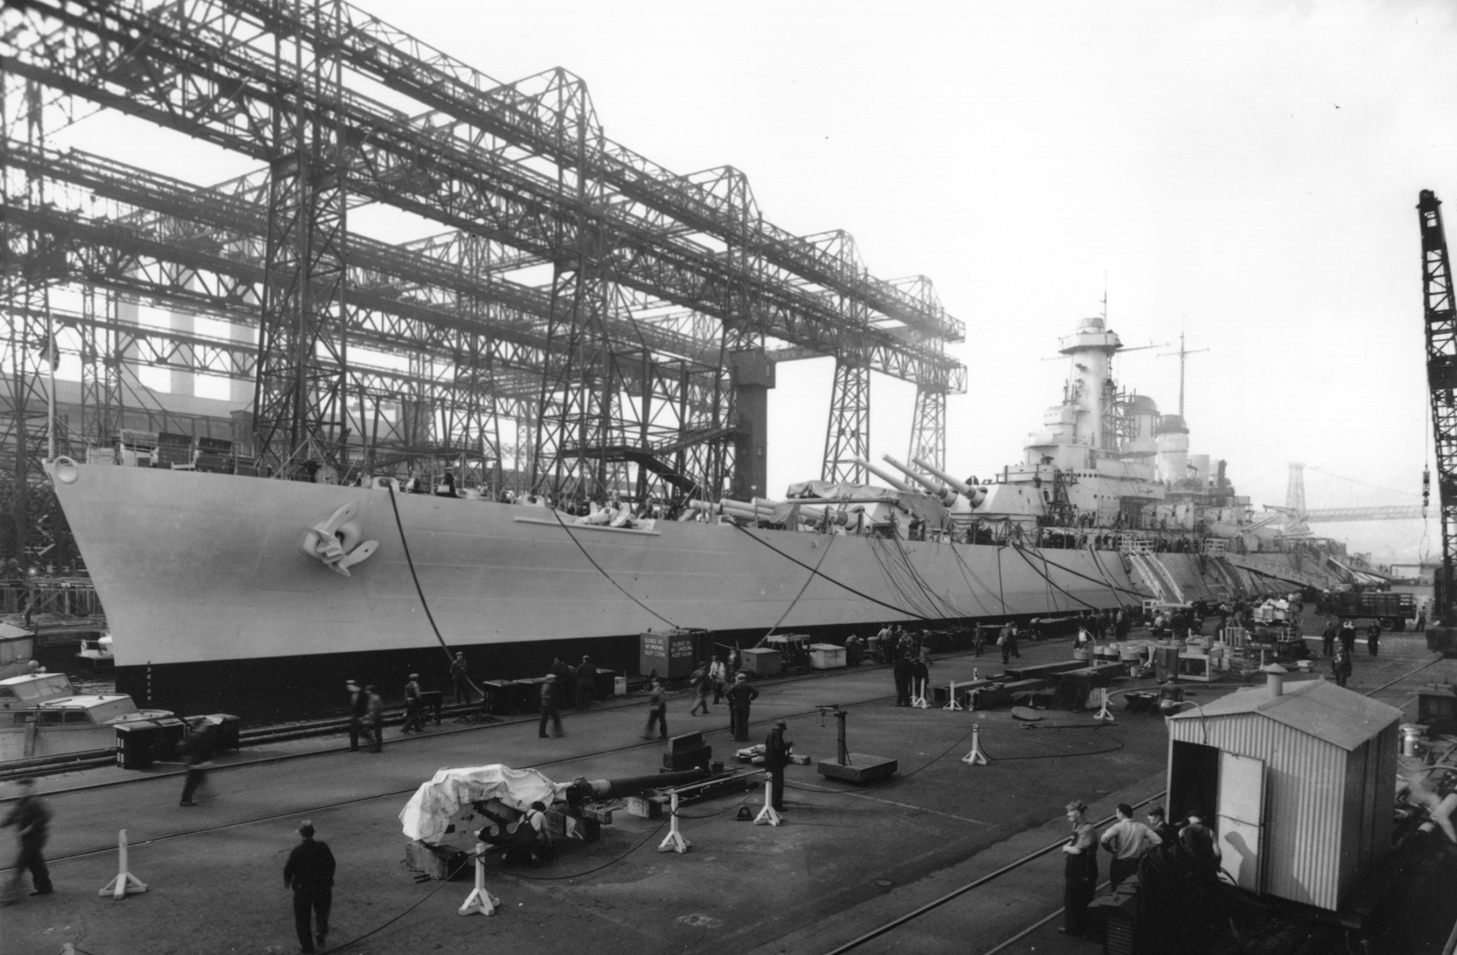 The newly-competed USS North Carolina BB55 at the New York Navy Yard in 1941 - photo 12